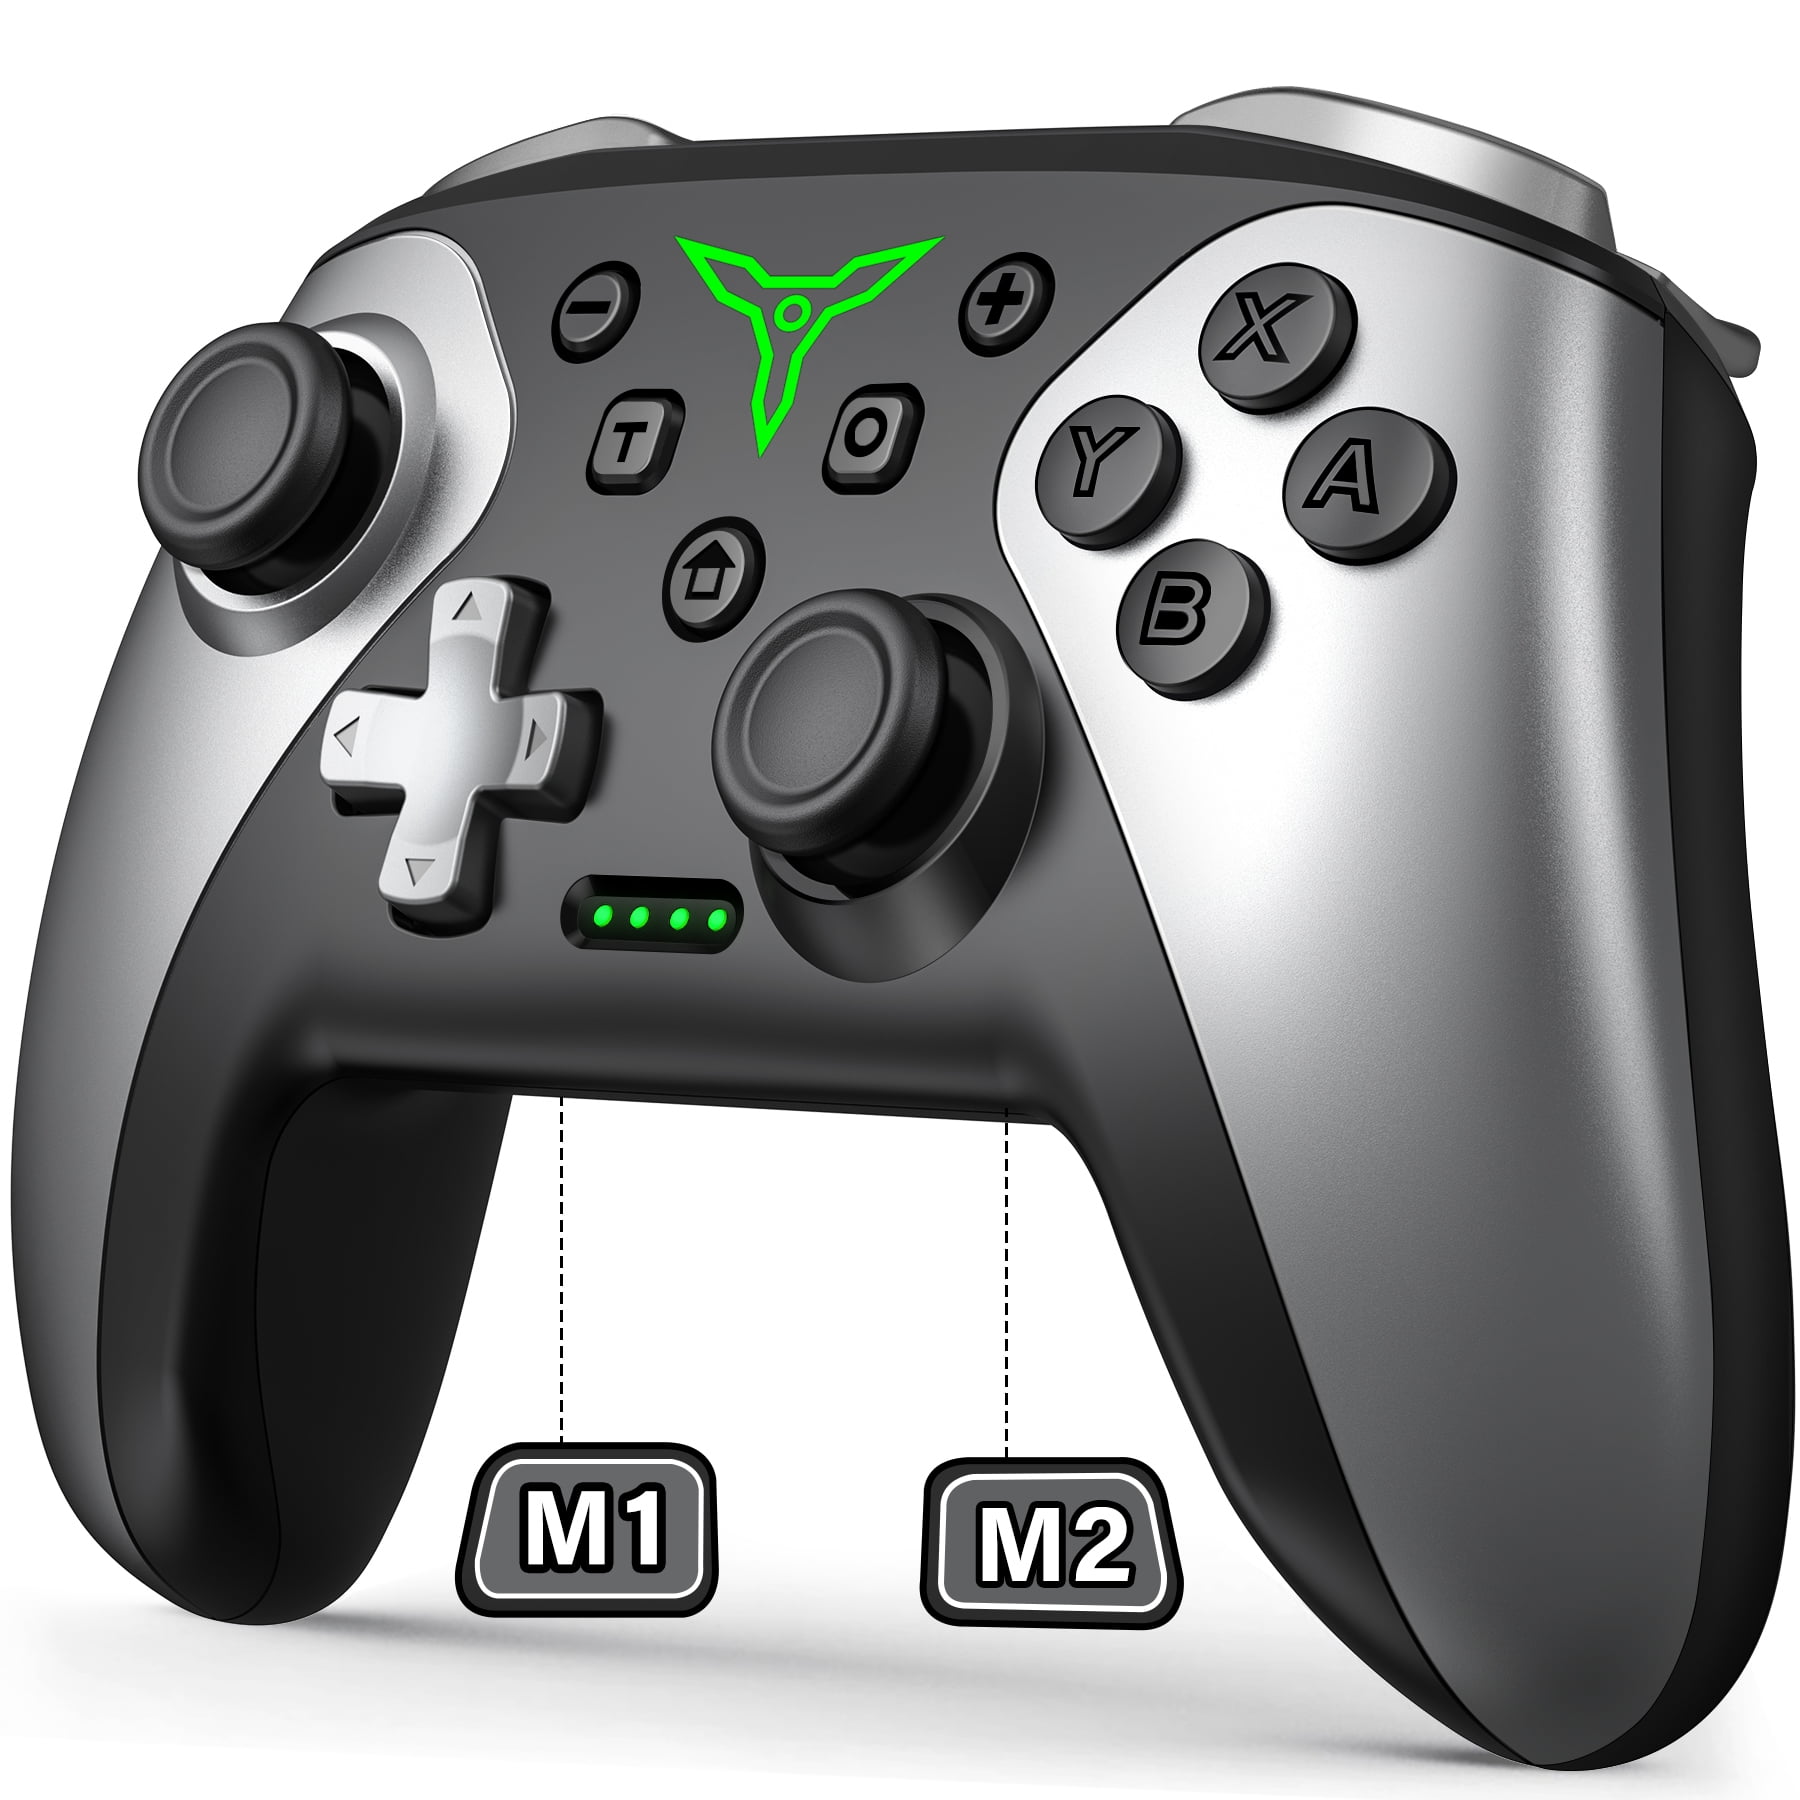 Controller,DinoFire Wireless Pro Controller with Wake-up,Programmable,Turbo Function, with a Mouse Touch Feeling on Back Buttons for Nintendo Switch/Lite/OLED - Walmart.com